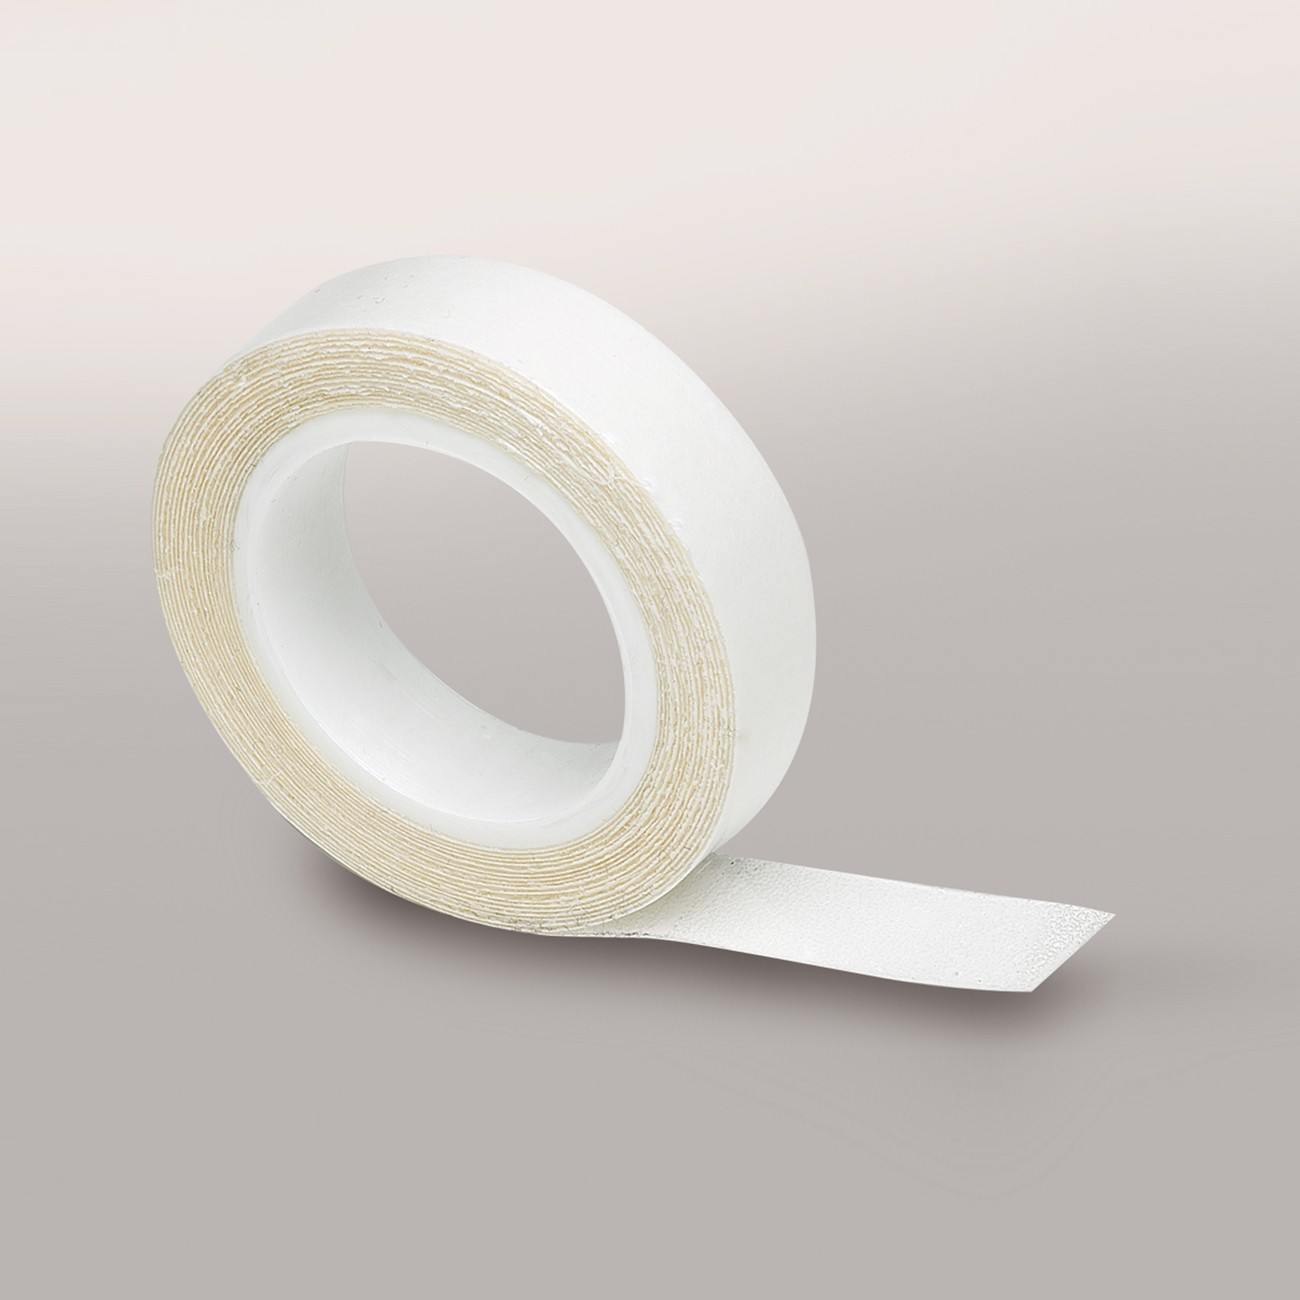 Synthetic Rubber Based Pressure Sensitive Adhesive (Tape)